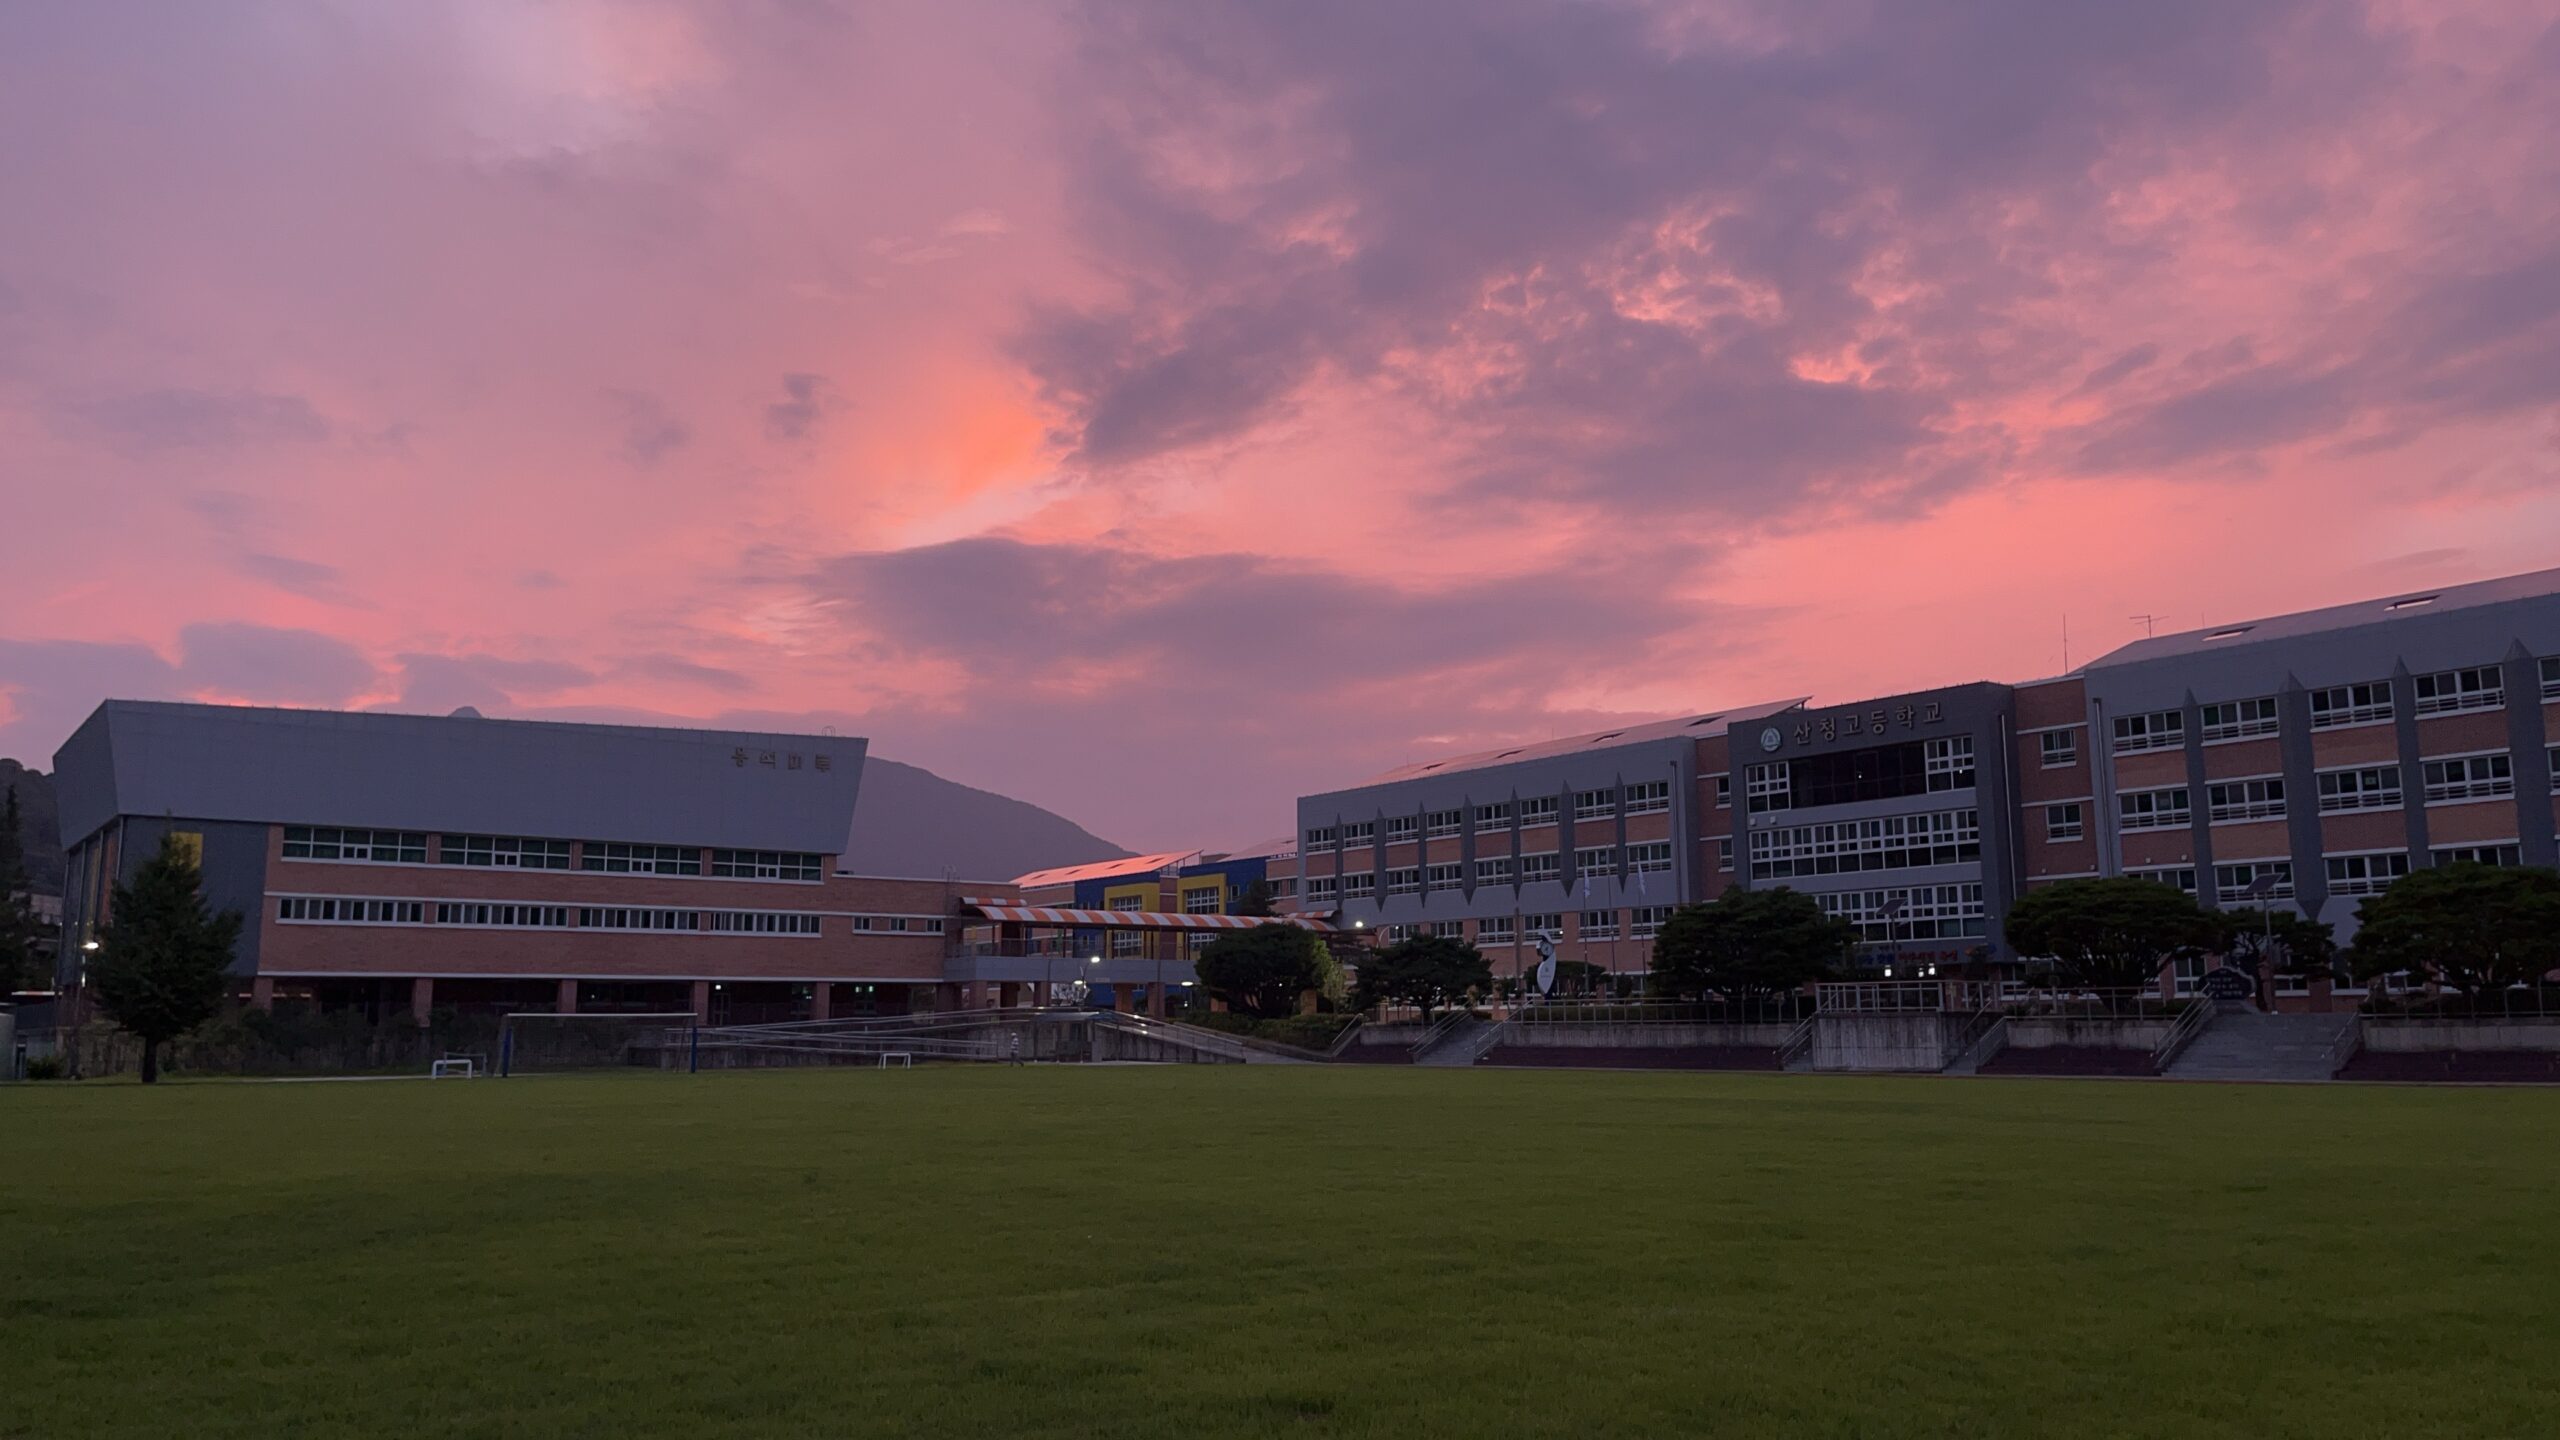 Photo of a school with a sunset